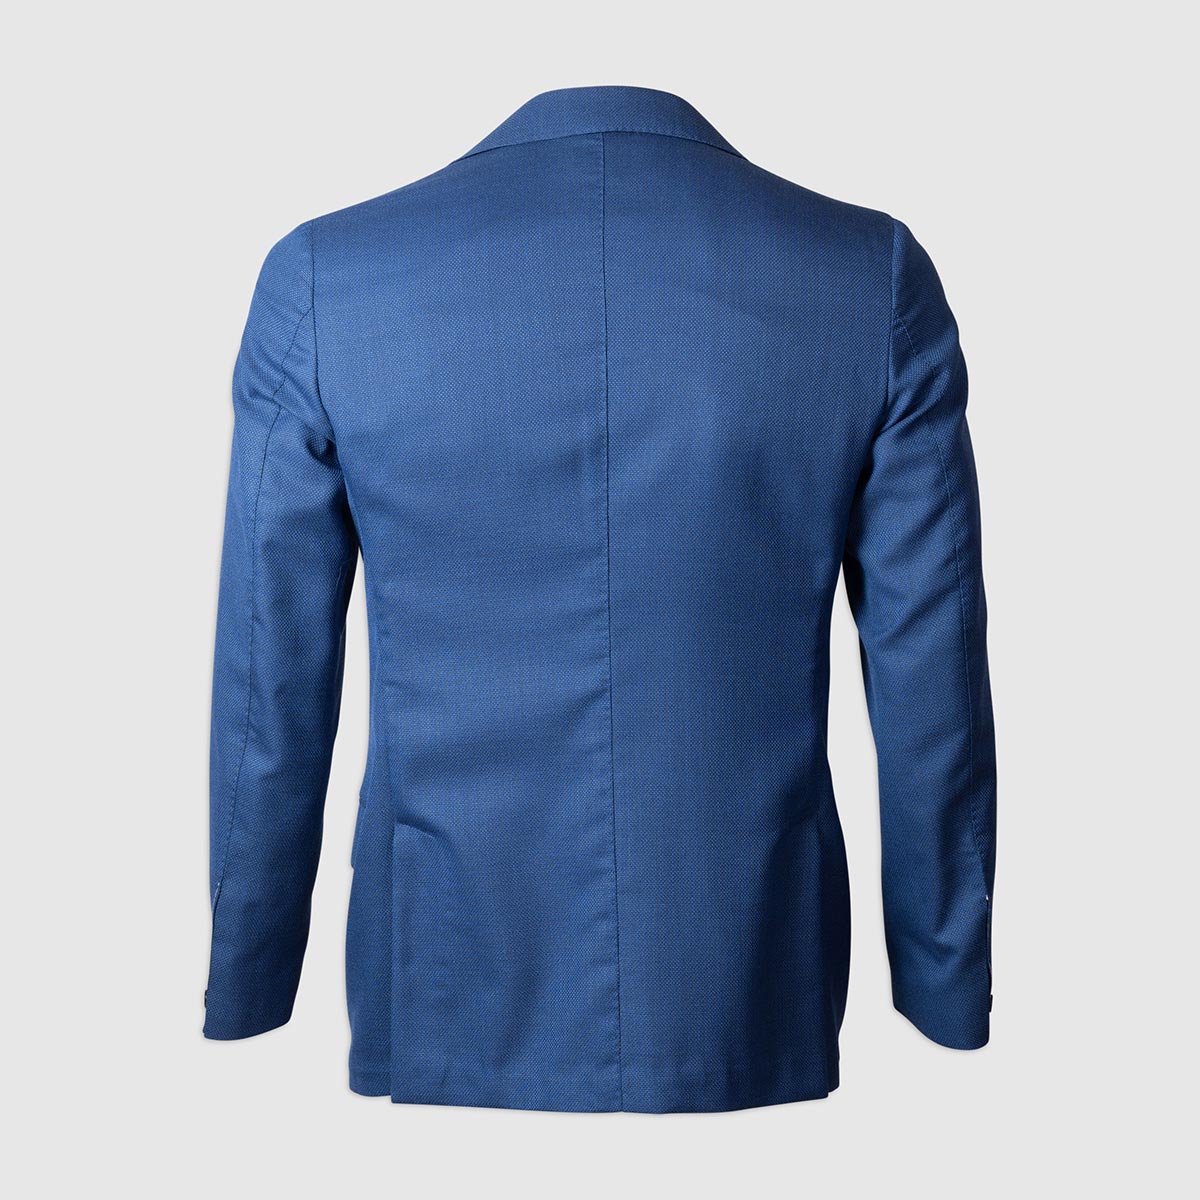 Half-lined Double-Breasted Jacket in 130’S Wool – Blue Melillo 1970 on sale 2022 2